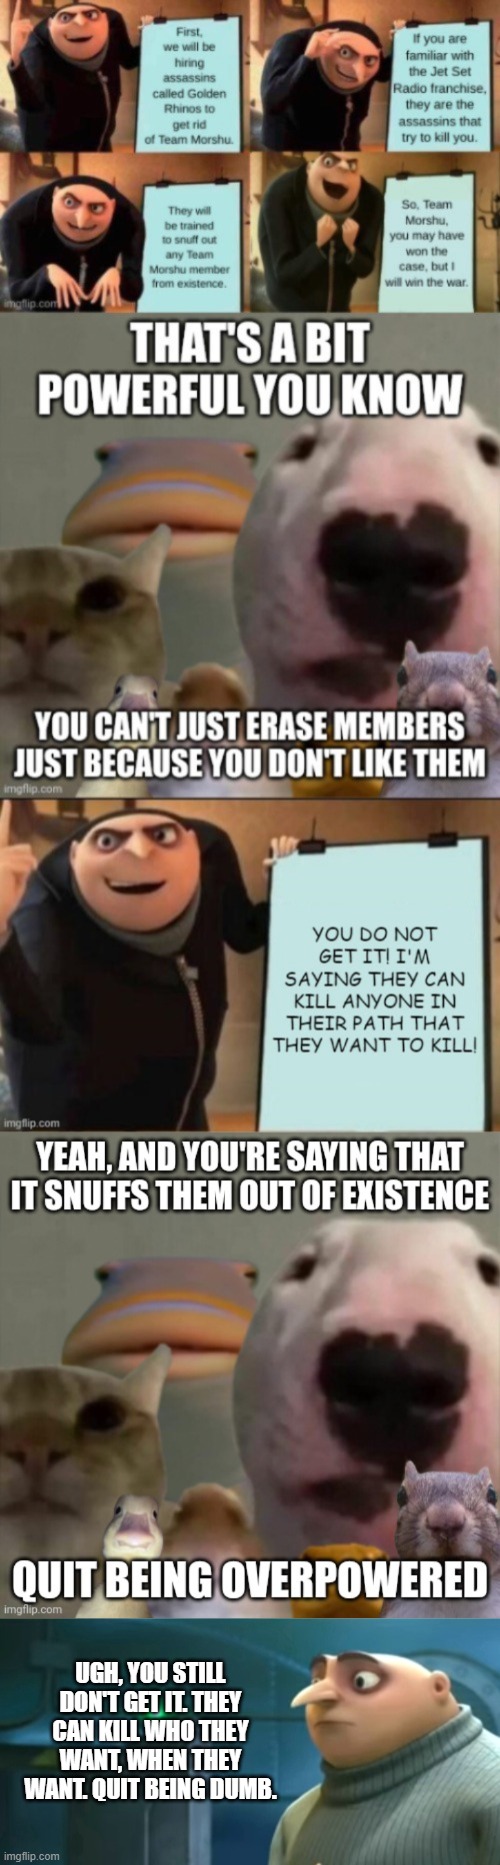 UGH, YOU STILL DON'T GET IT. THEY CAN KILL WHO THEY WANT, WHEN THEY WANT. QUIT BEING DUMB. | image tagged in in terms of money we have no money | made w/ Imgflip meme maker